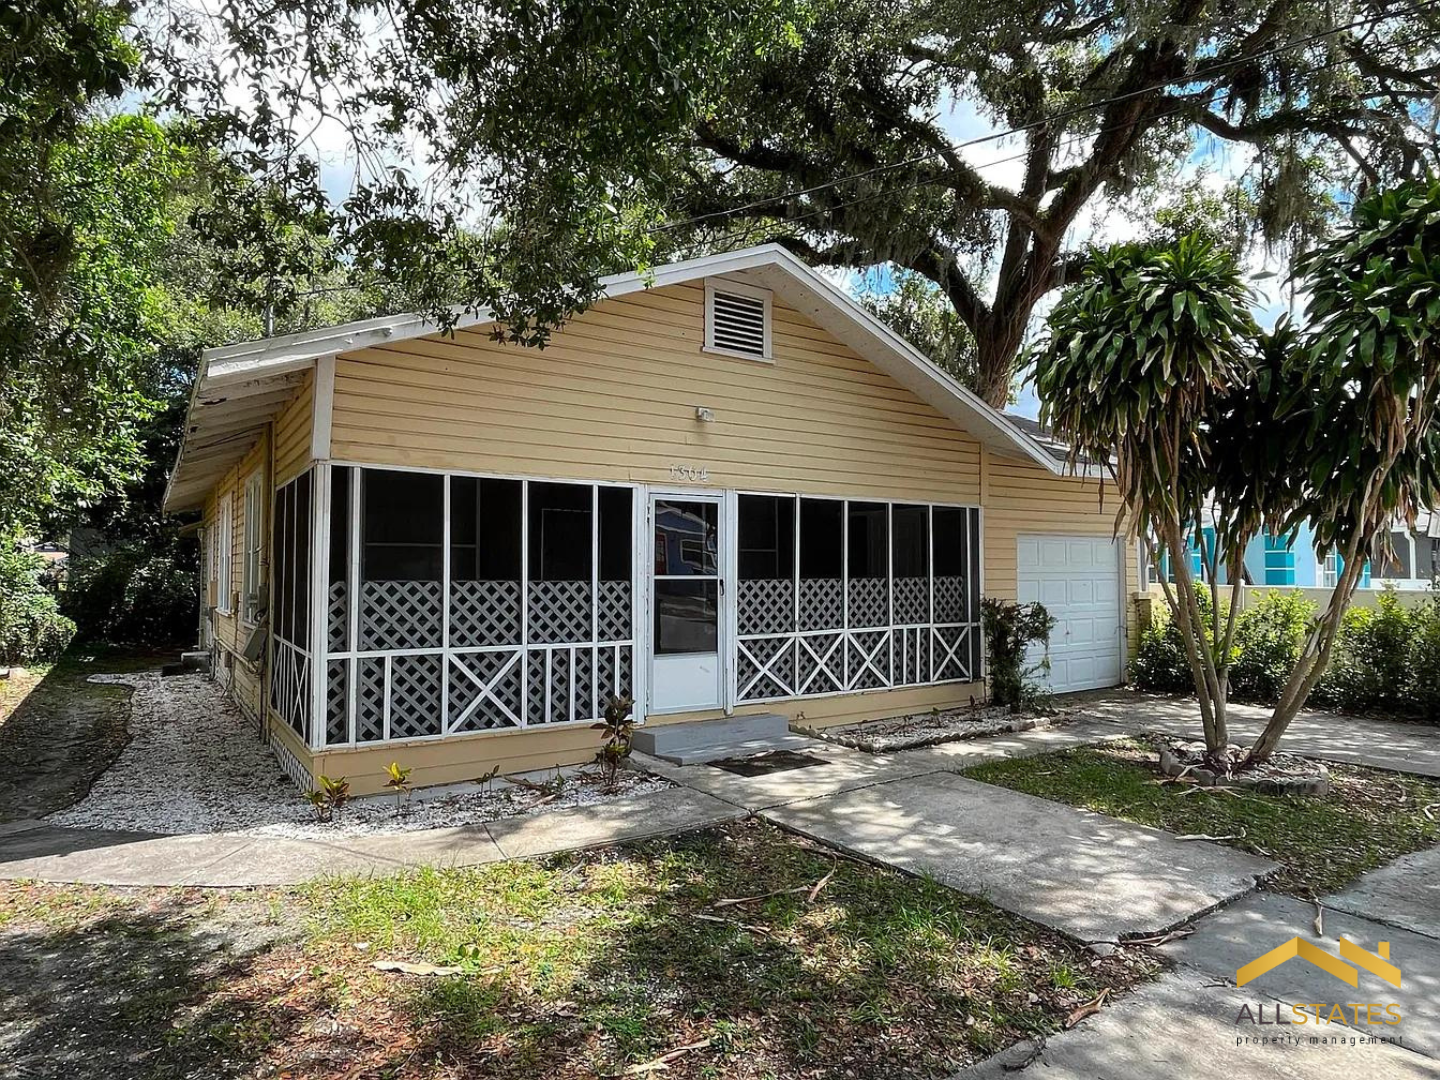 Photo of property: 1304 E 32nd Ave, Tampa, FL 33603